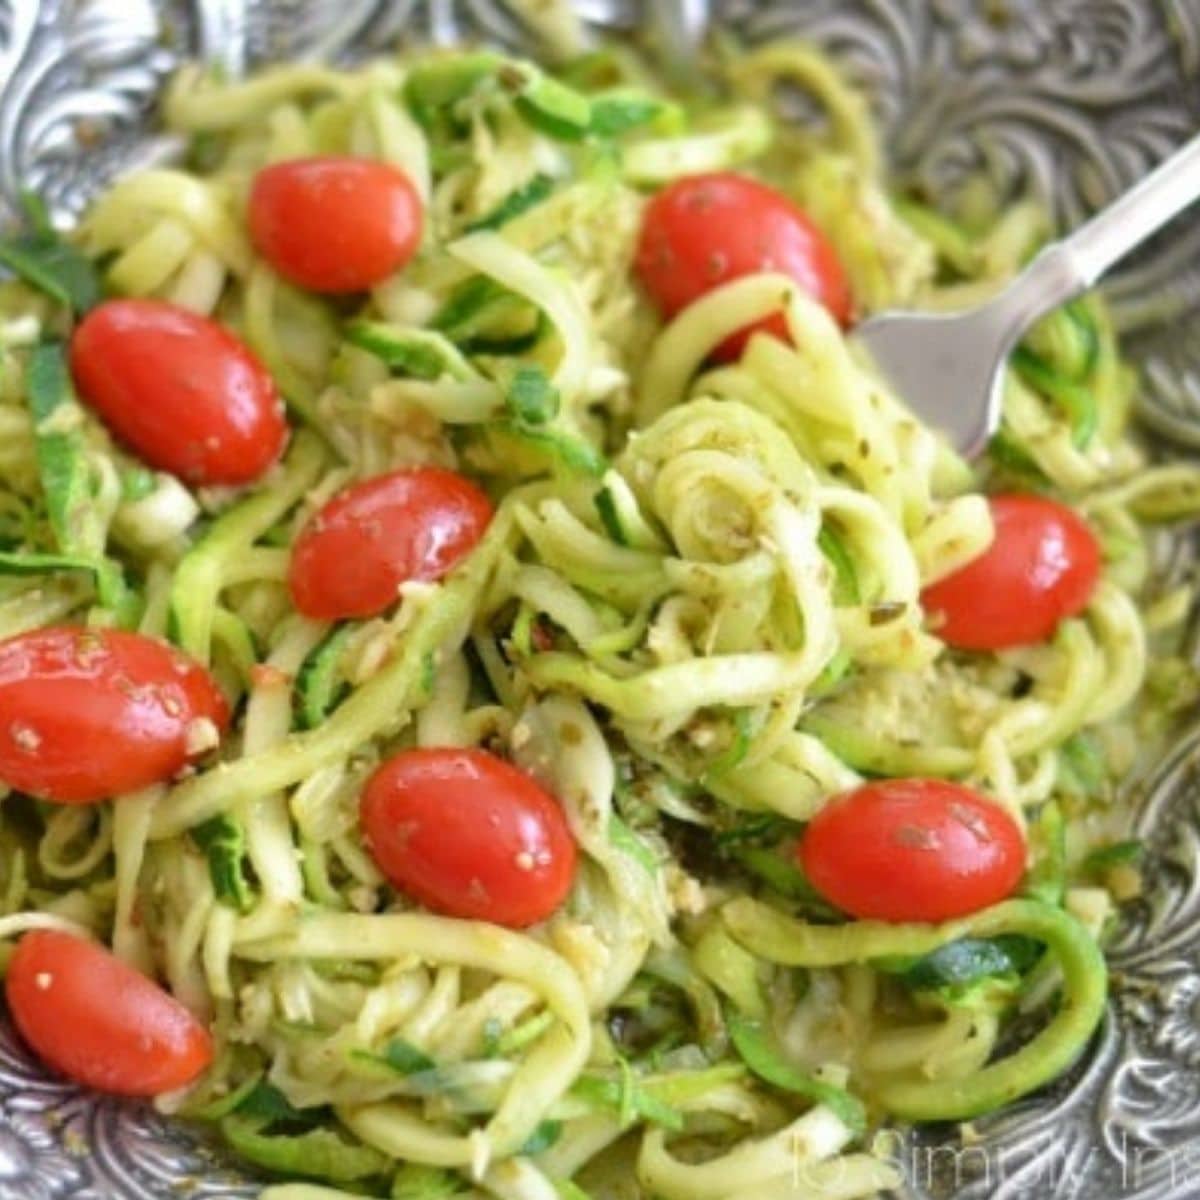 The Italian Dish - Posts - Spiralized Zucchini Noodles with Basil Pesto